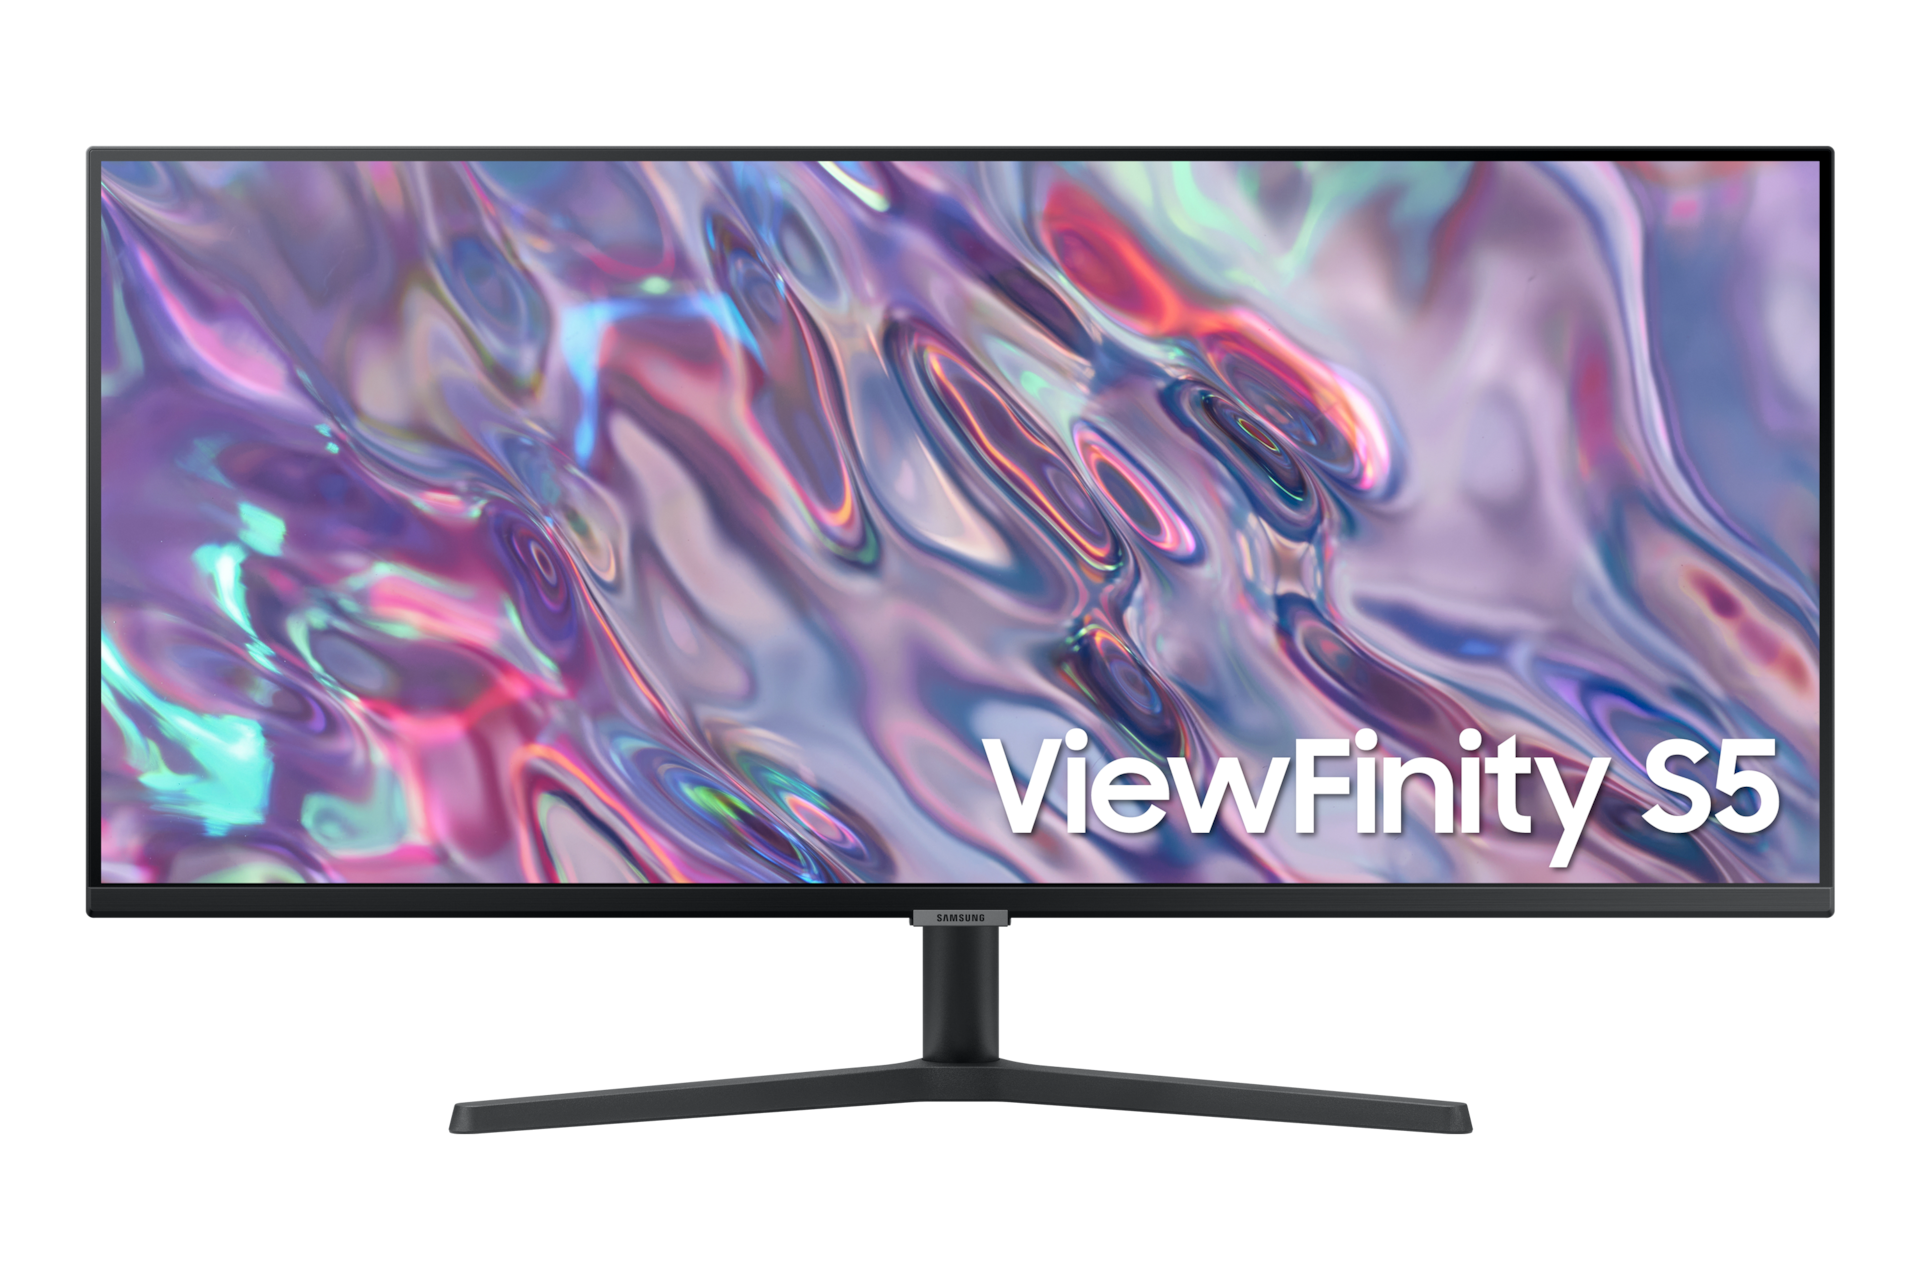 Image of Samsung 34  ViewFinity S5 with 21:9 Ultra WQHD resolution